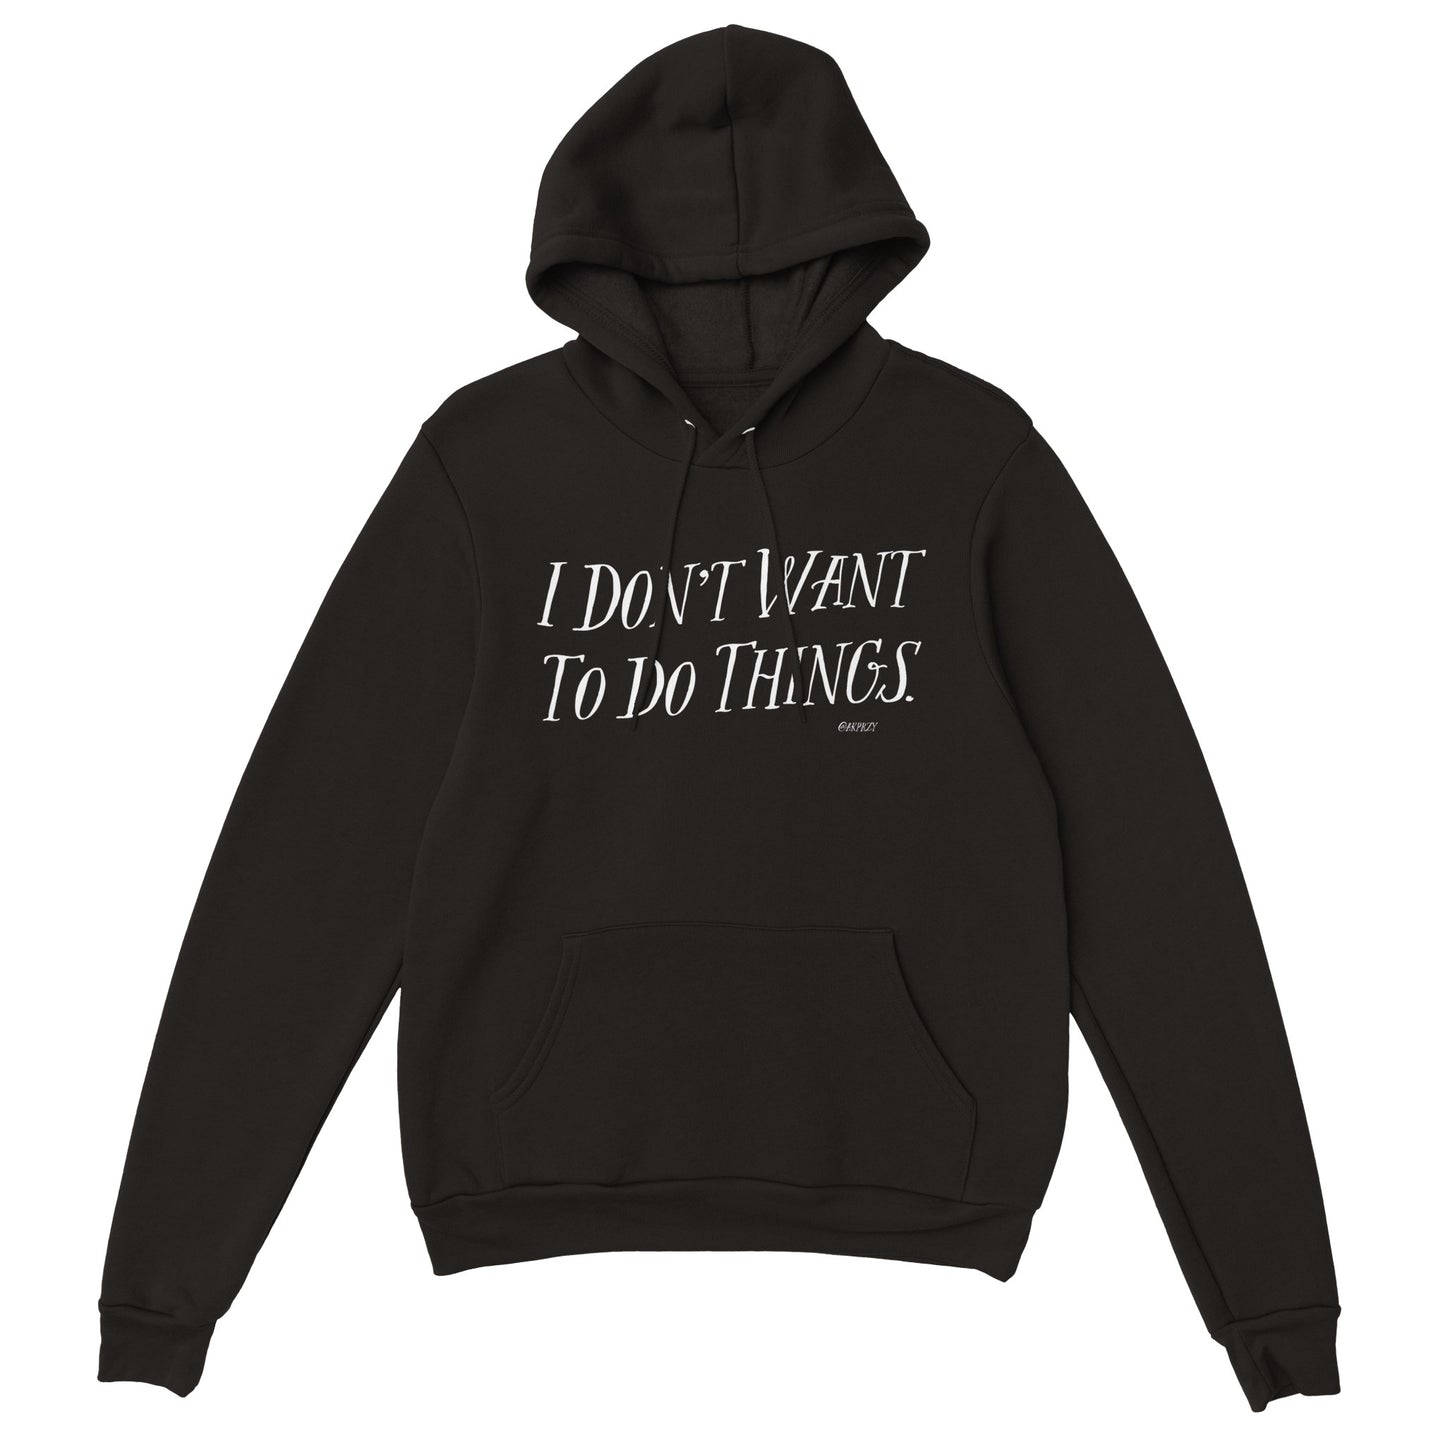 Premium Unisex Pullover Hoodie - I don't want to do things.